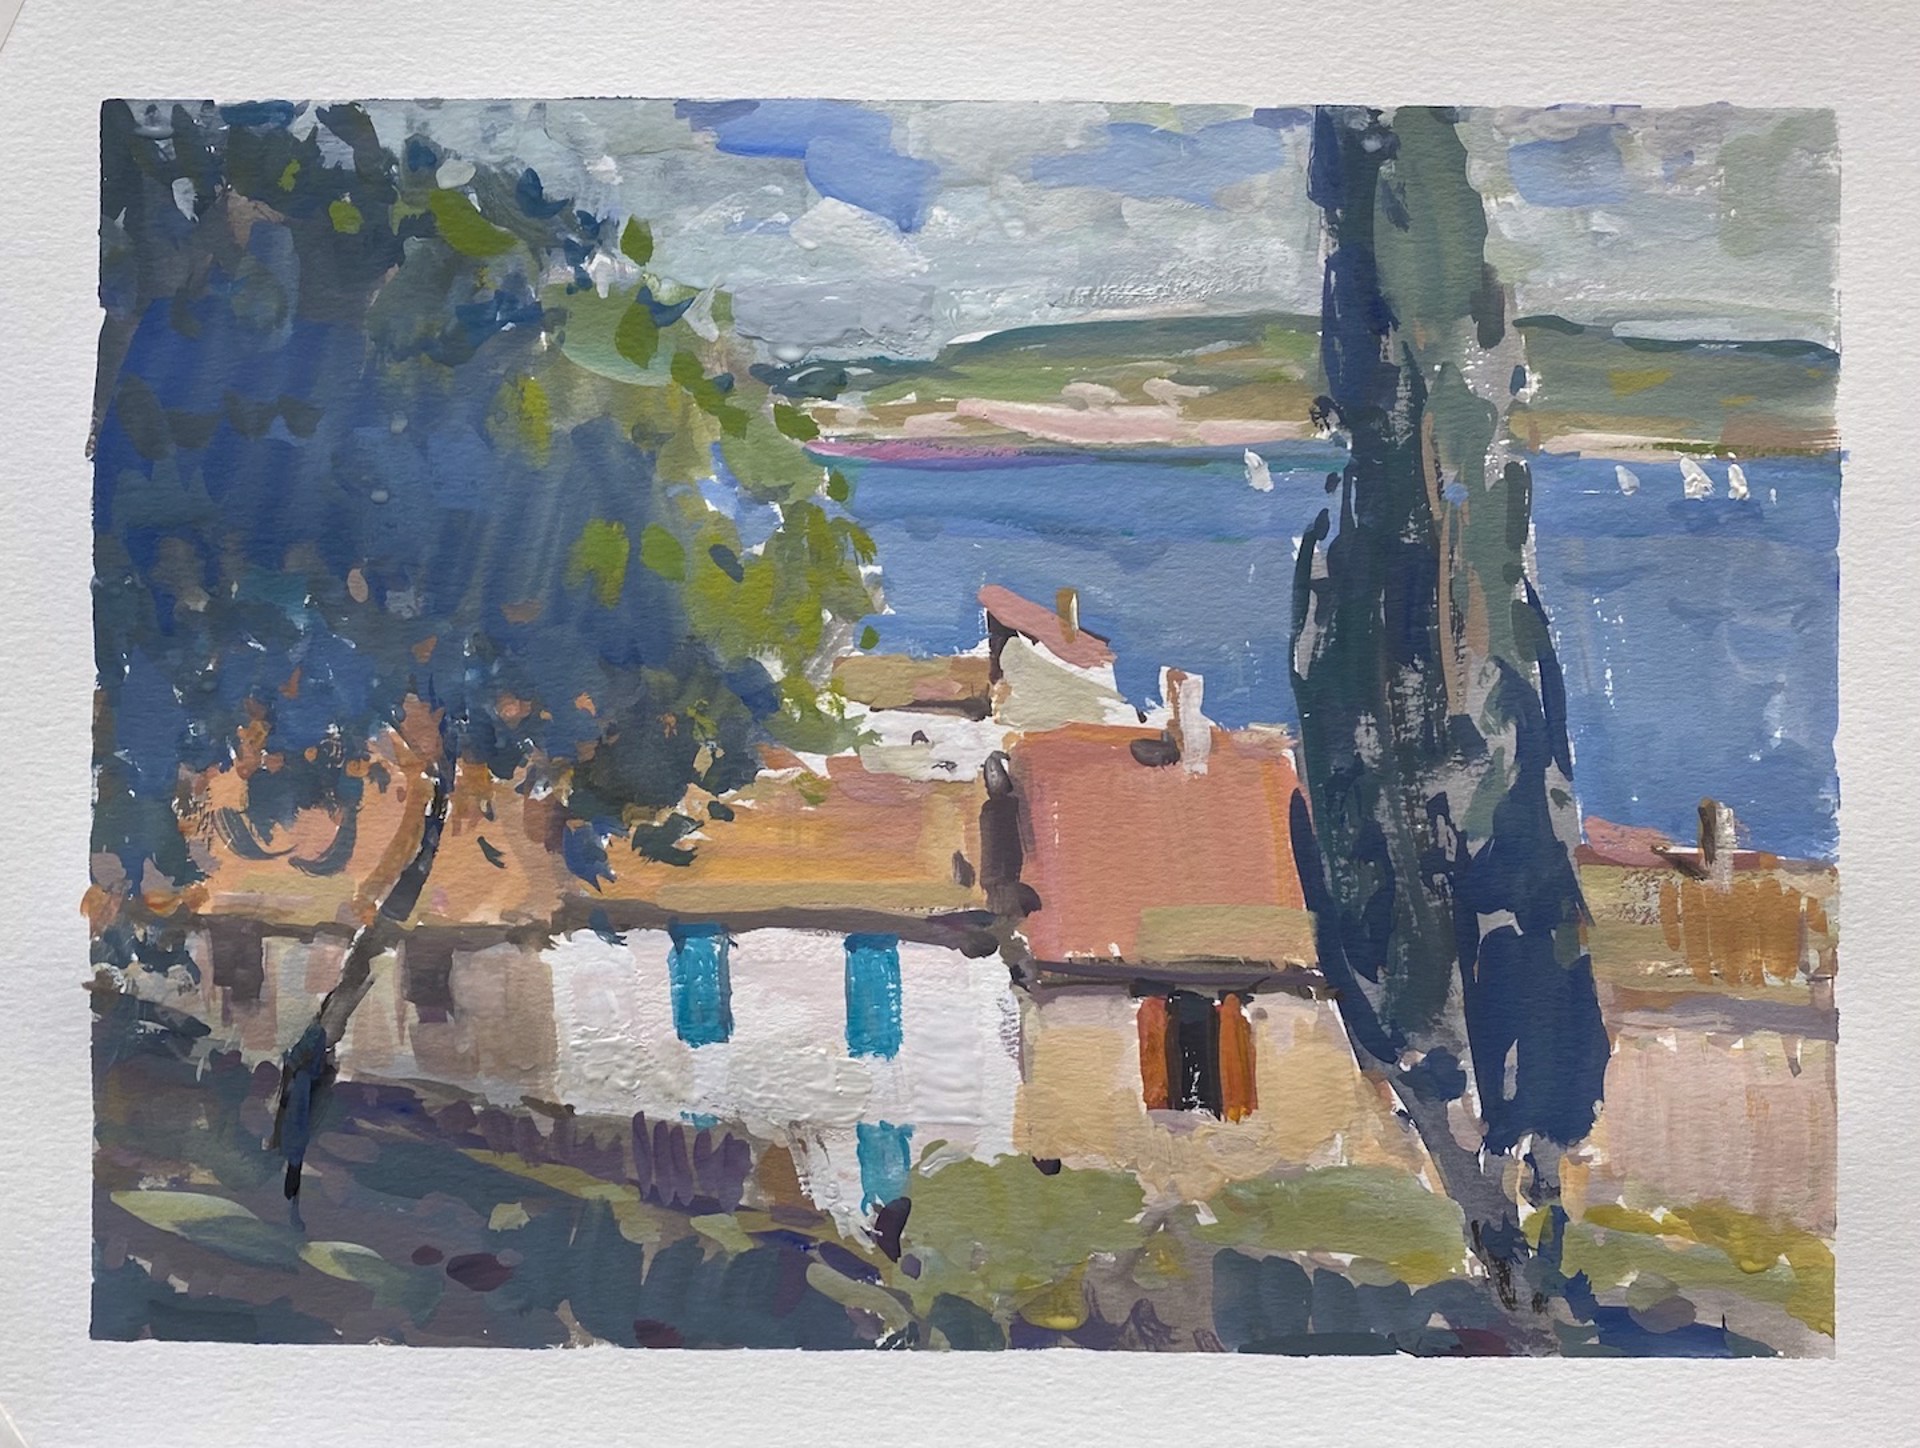 French Riviera by Richard Oversmith